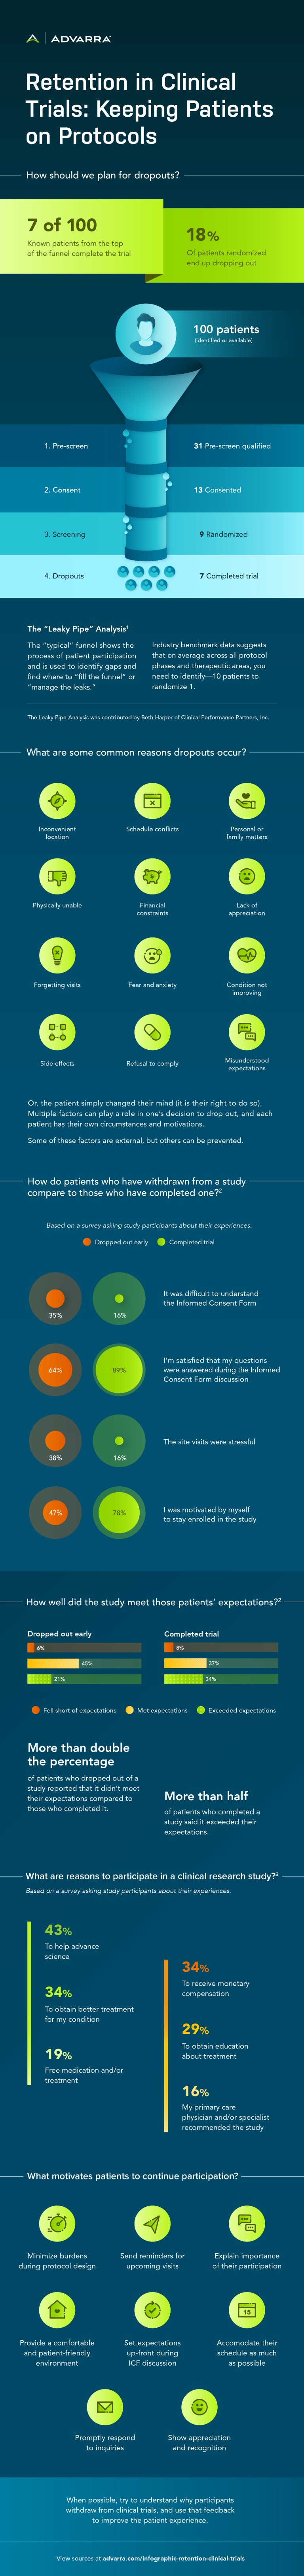 Infographic for Retention in Clinical Trials: Keeping Patients on Protocols (full text below)